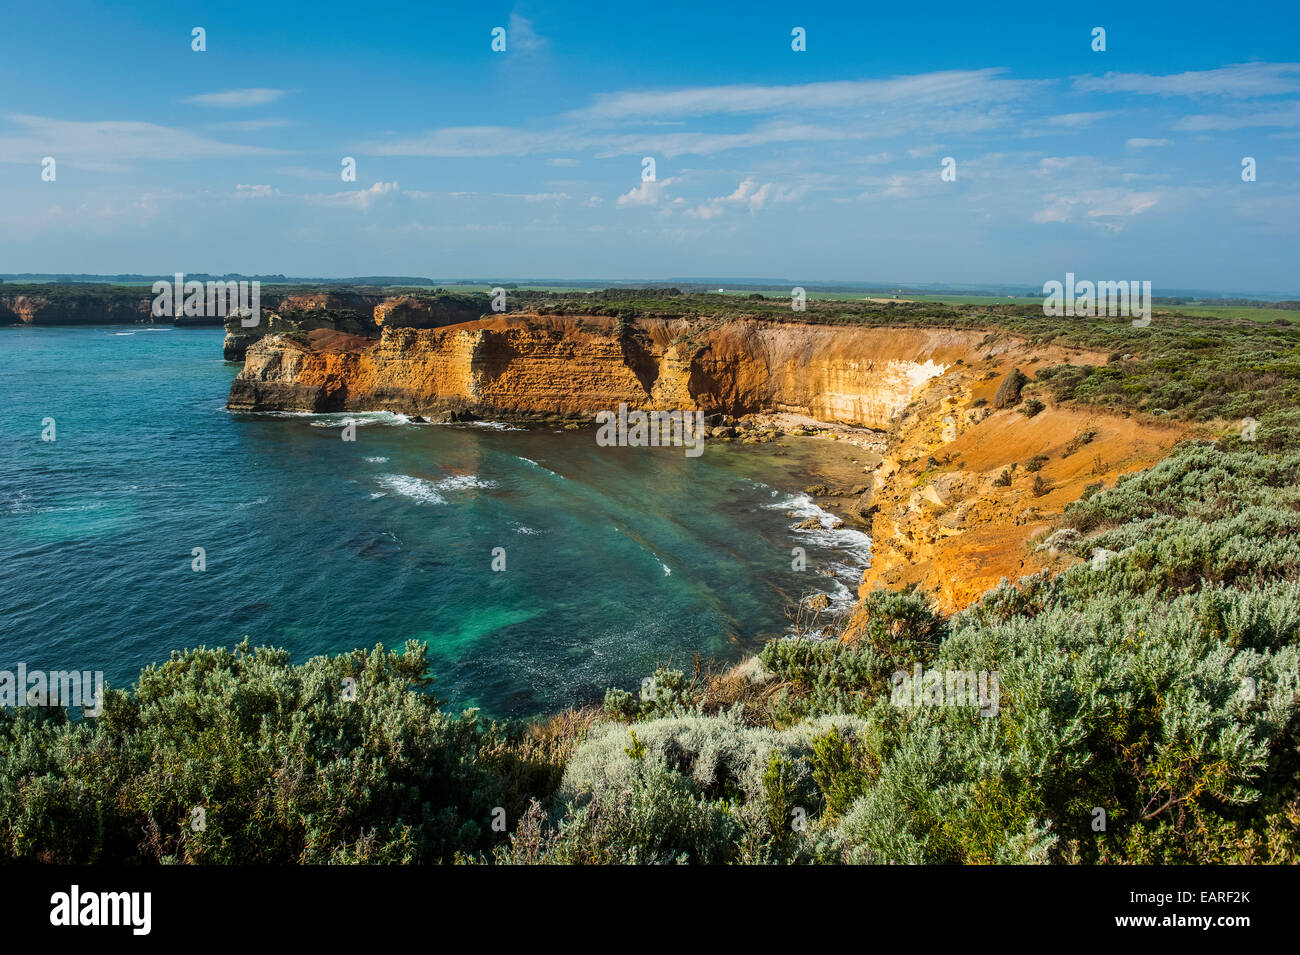 Bay of islands rock formations along the Great Ocean Road, Victoria, Australia Stock Photo